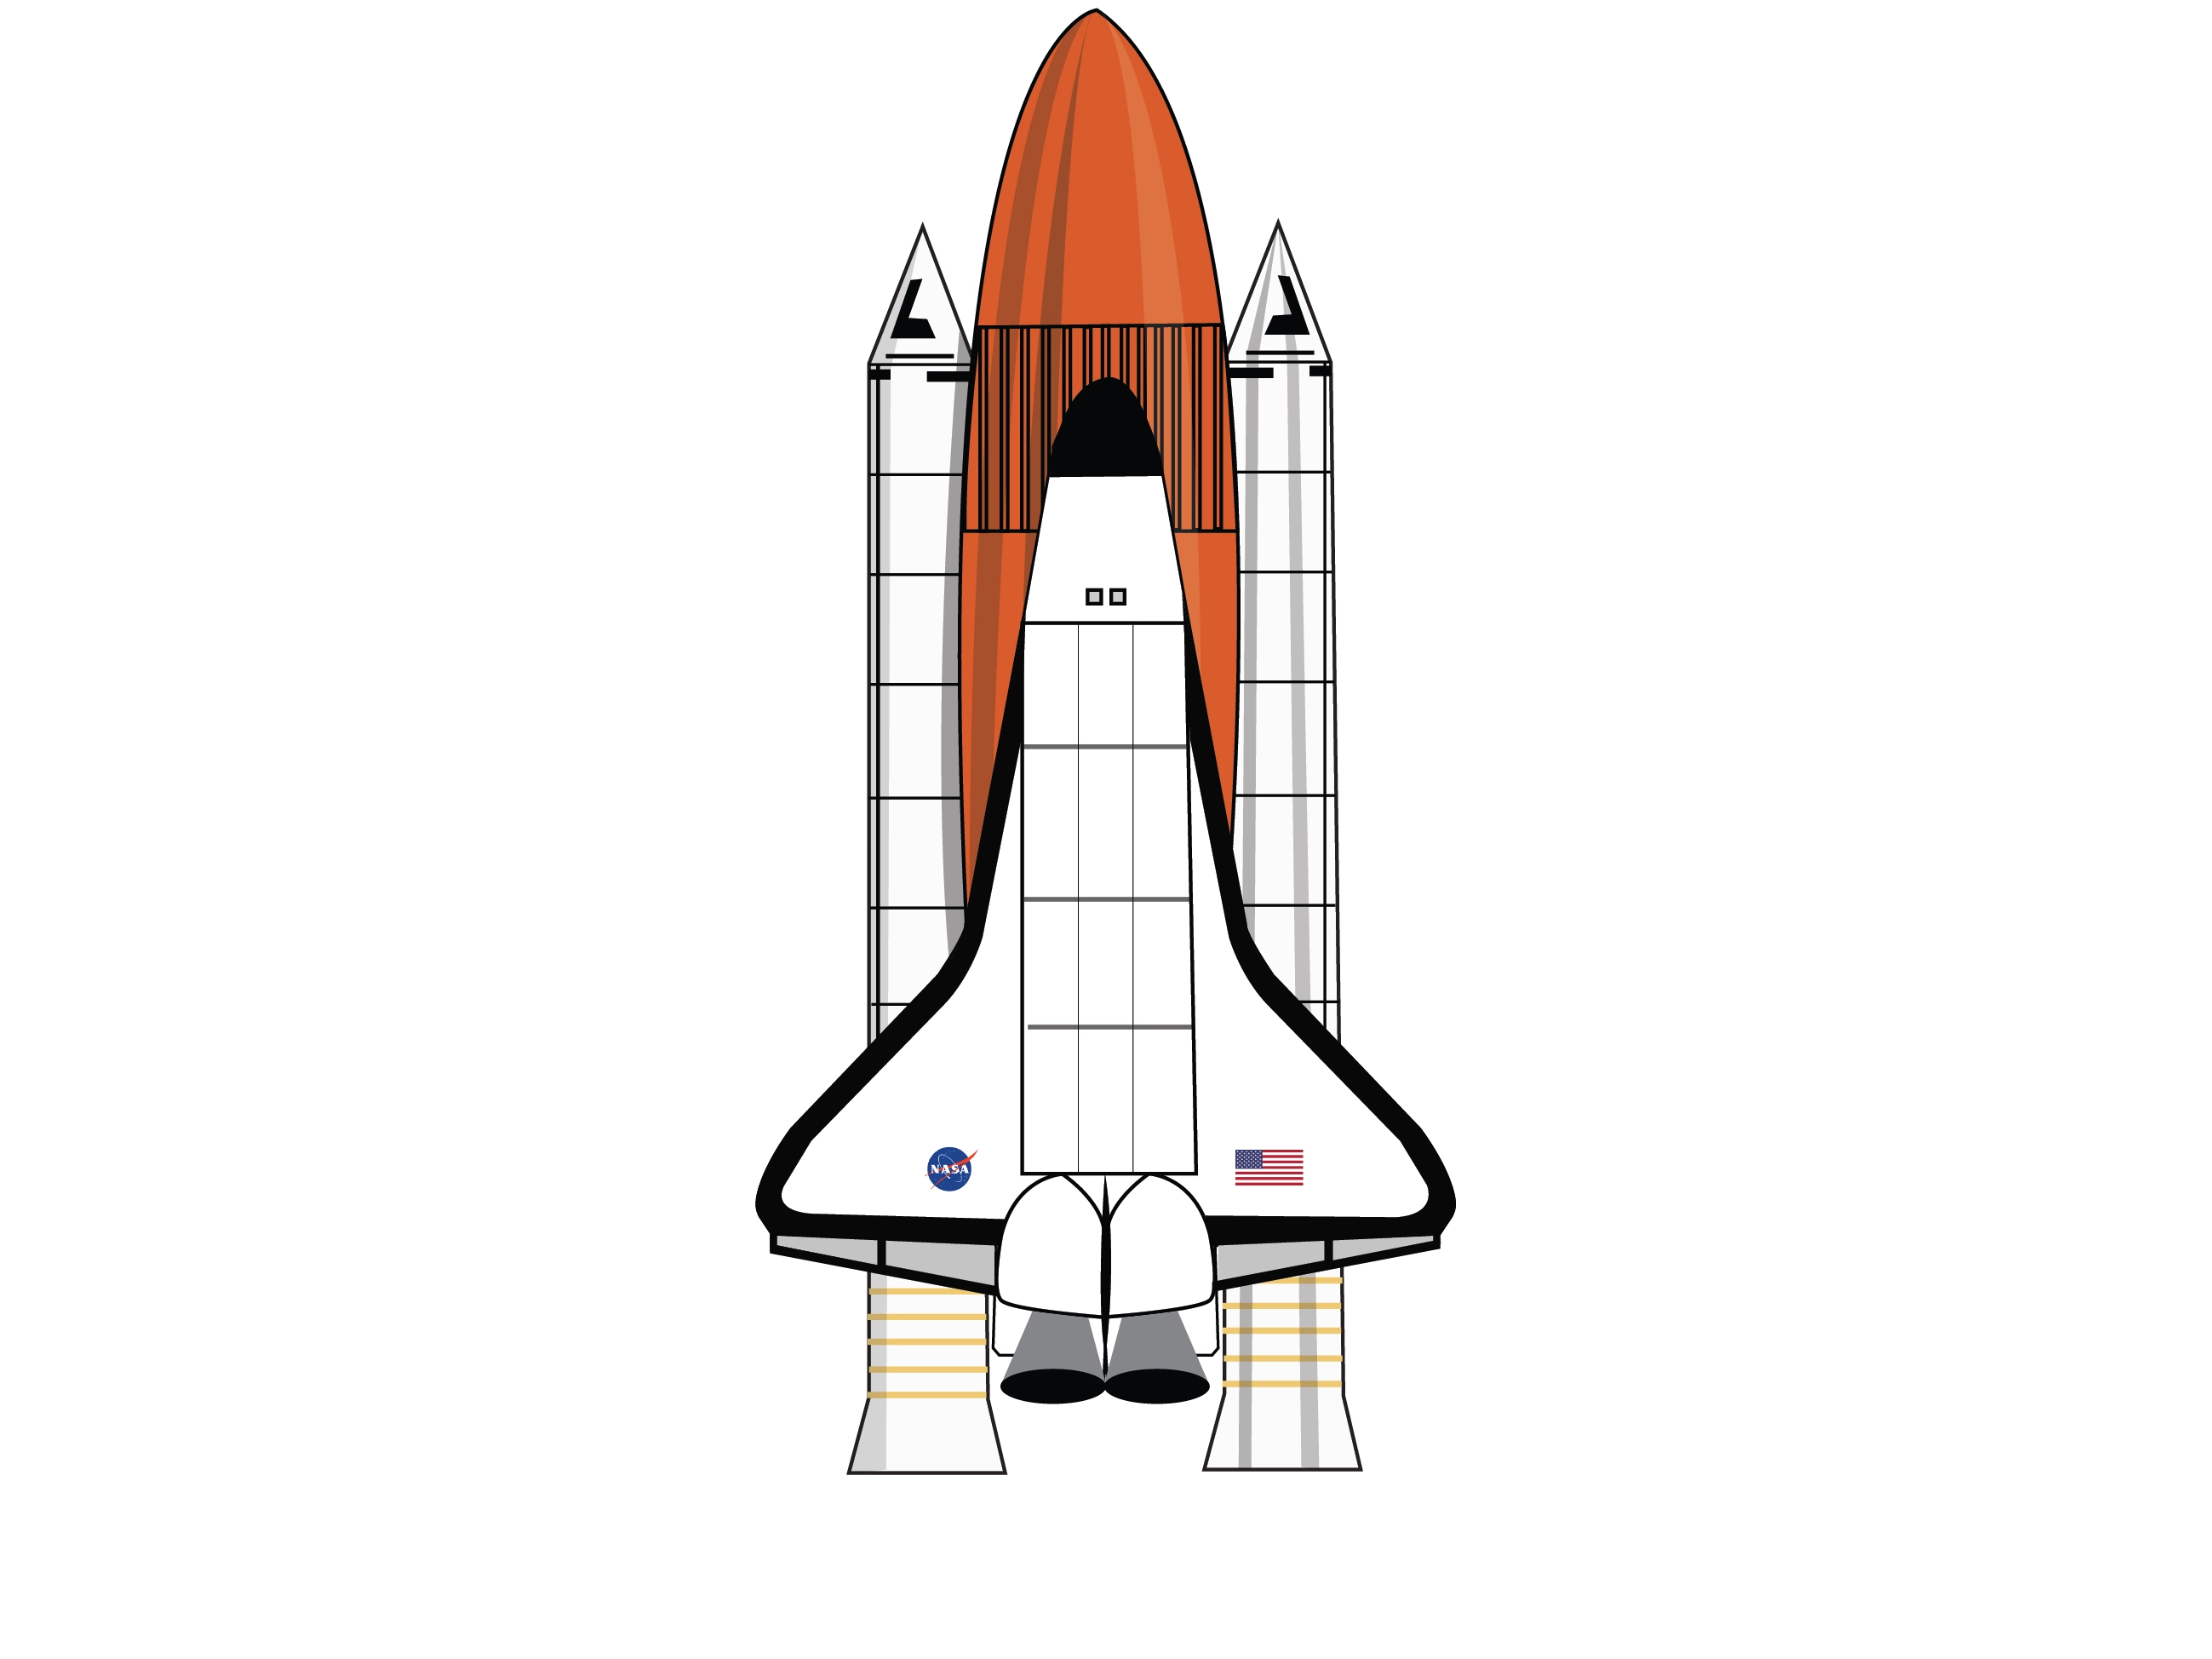 NASA Discovery program - NASA Space Shuttle Discovery STS - Orbiter Vehicle Designation - Дискавери (шаттл)